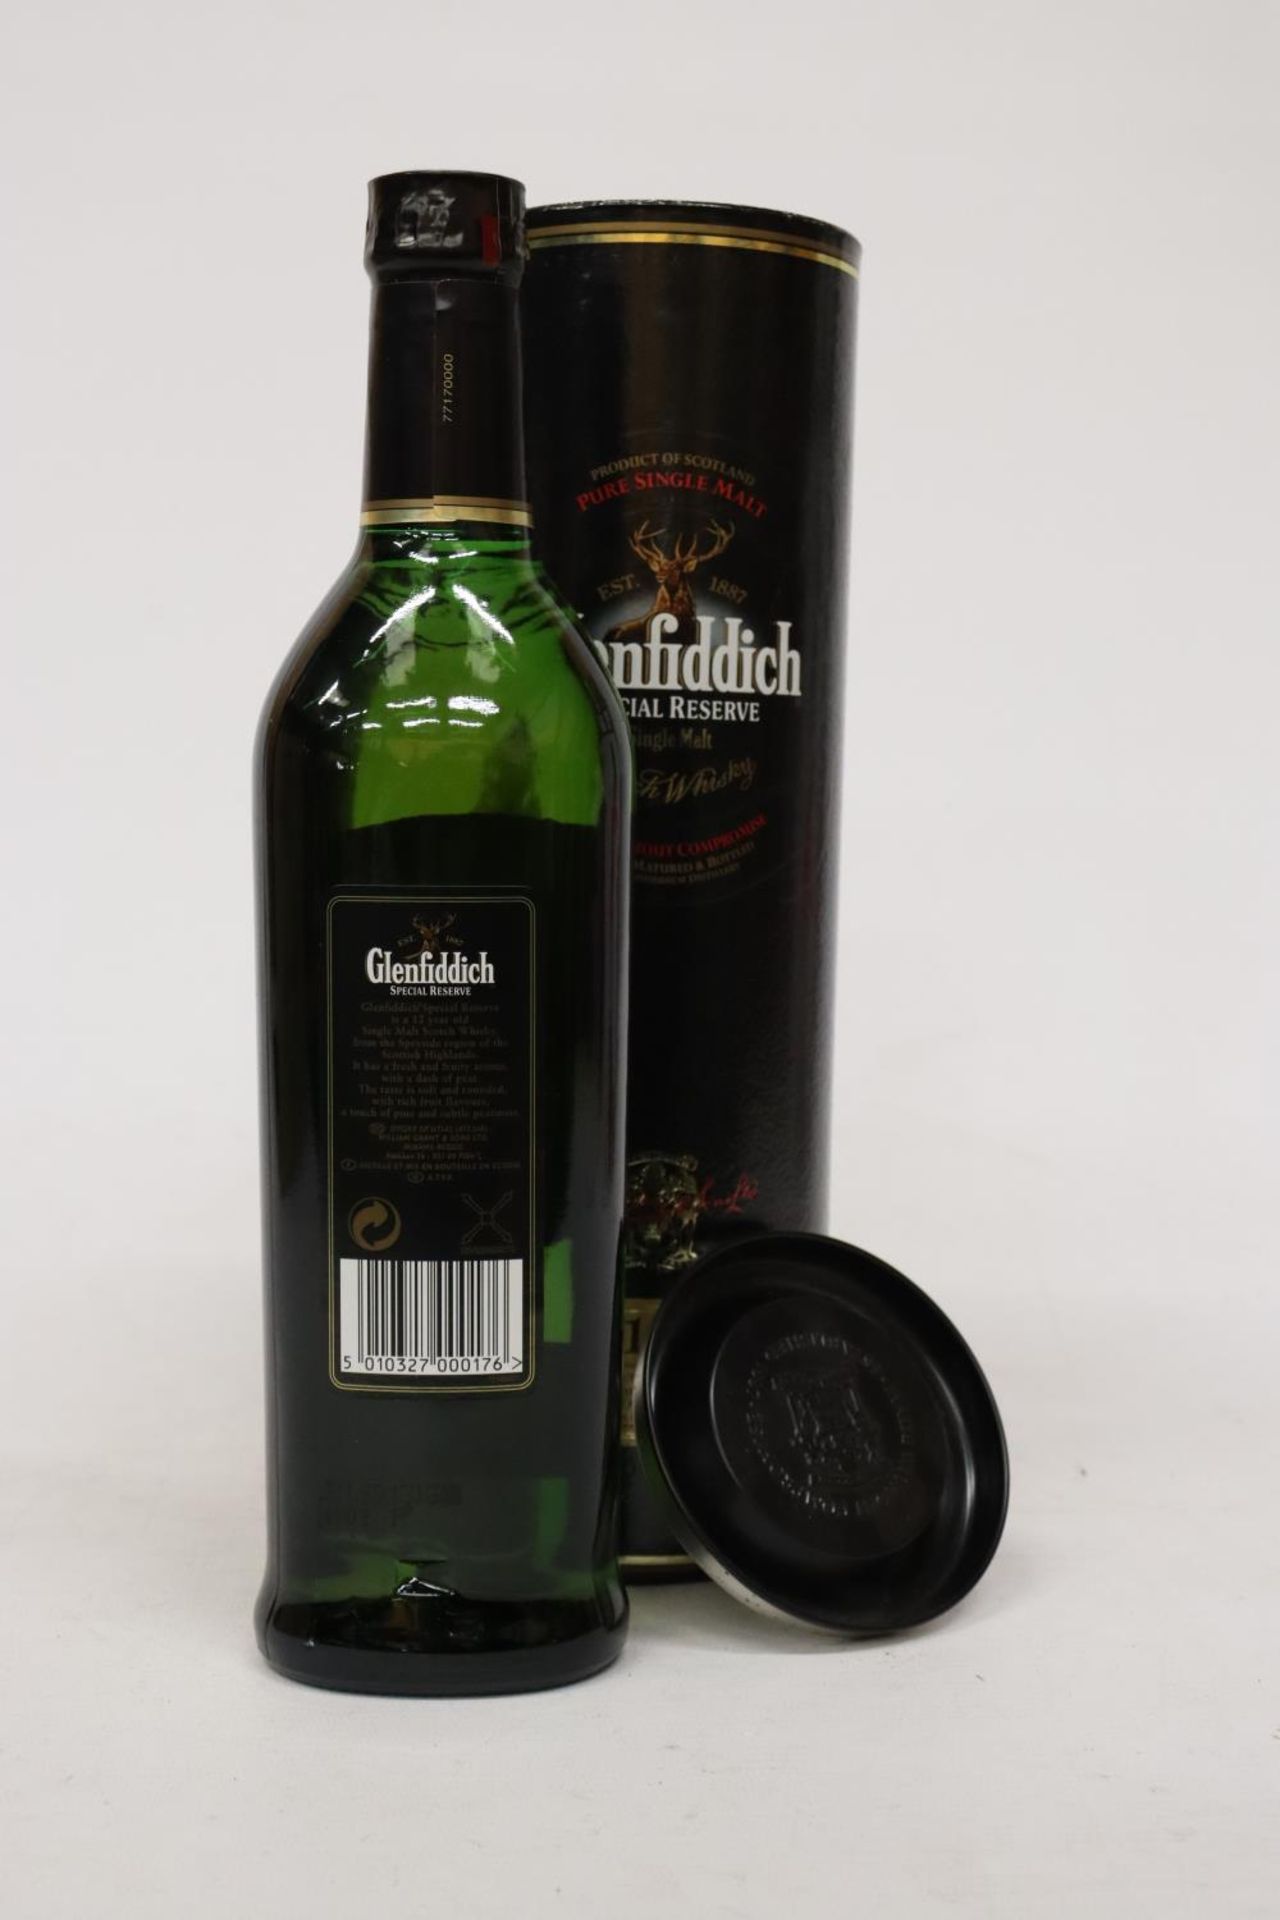 A BOTTLE OF GLENFIDDICH SPECIAL RESERVE 12 YEAR OLD MALT WHISKY, BOXED - Image 3 of 4